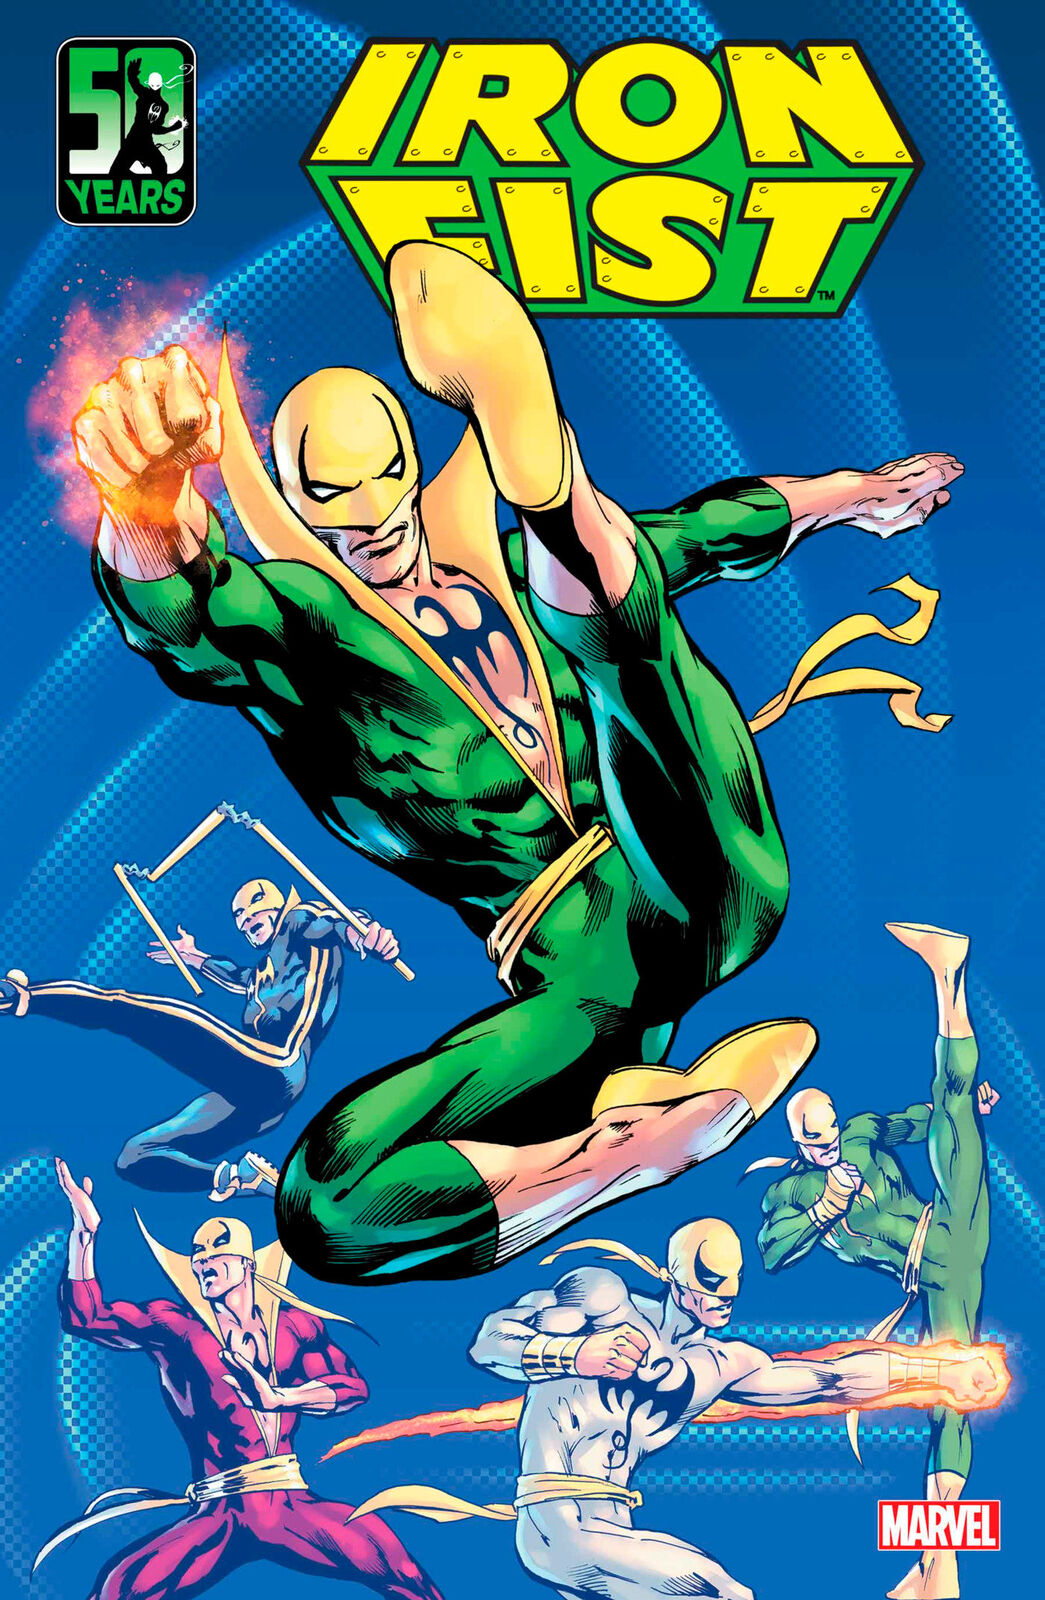 IRON FIST 50TH ANNIVERSARY SPECIAL #1